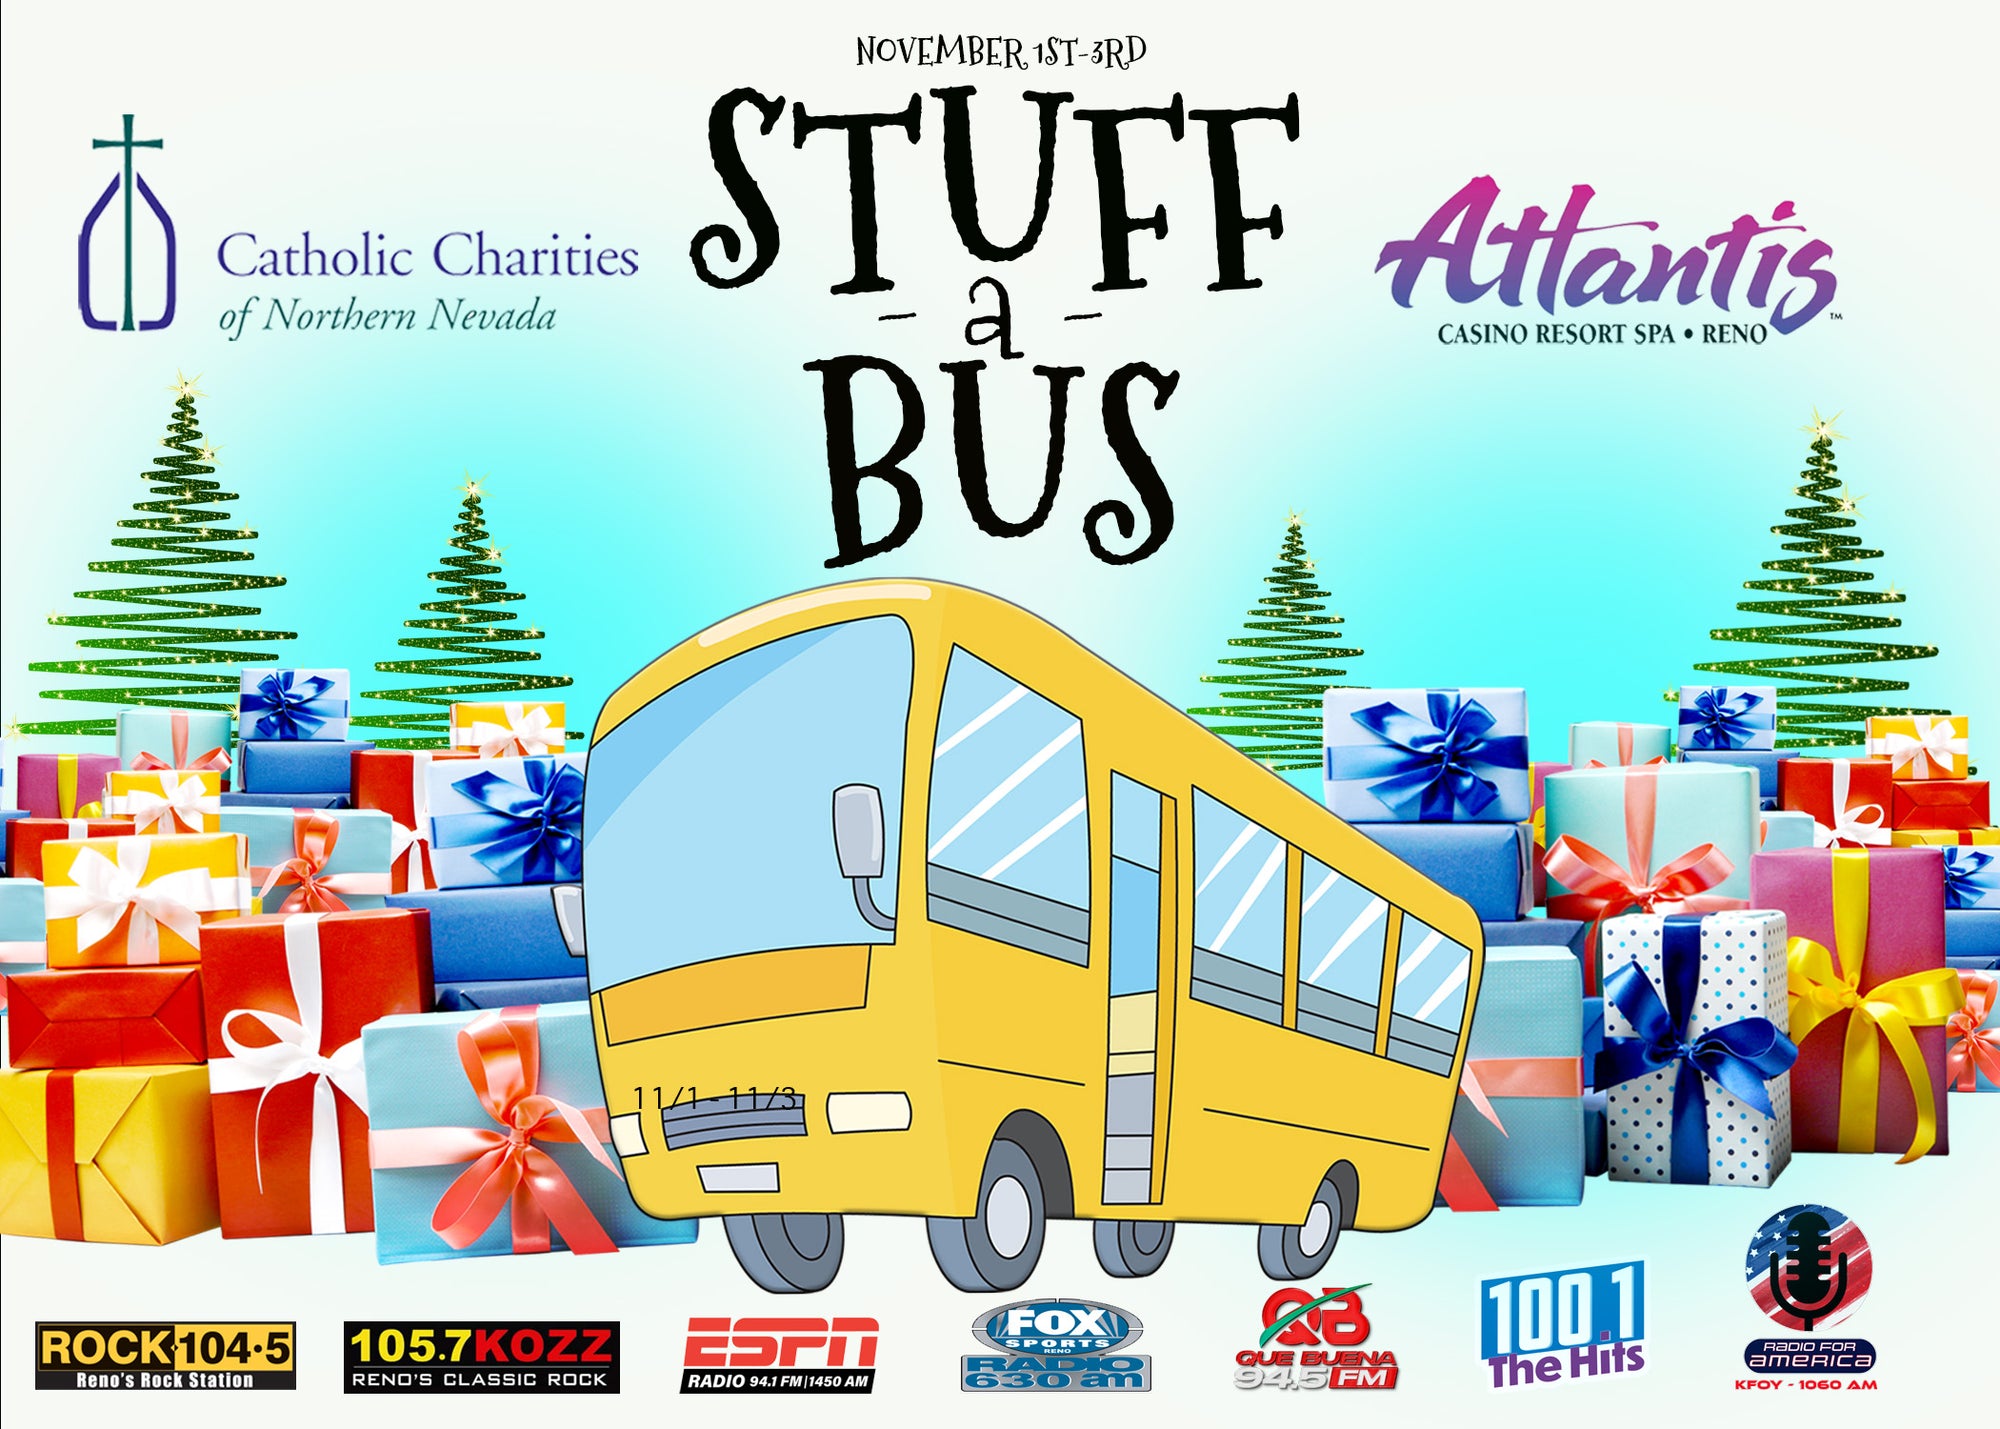 Catholic Charities of Northern Nevada is so excited to be partnering with Lotus Radio for the annual Stuff-A-Bus taking place this Wednesday through Friday at the Atlantis Casino Resort..Reno Nevada.